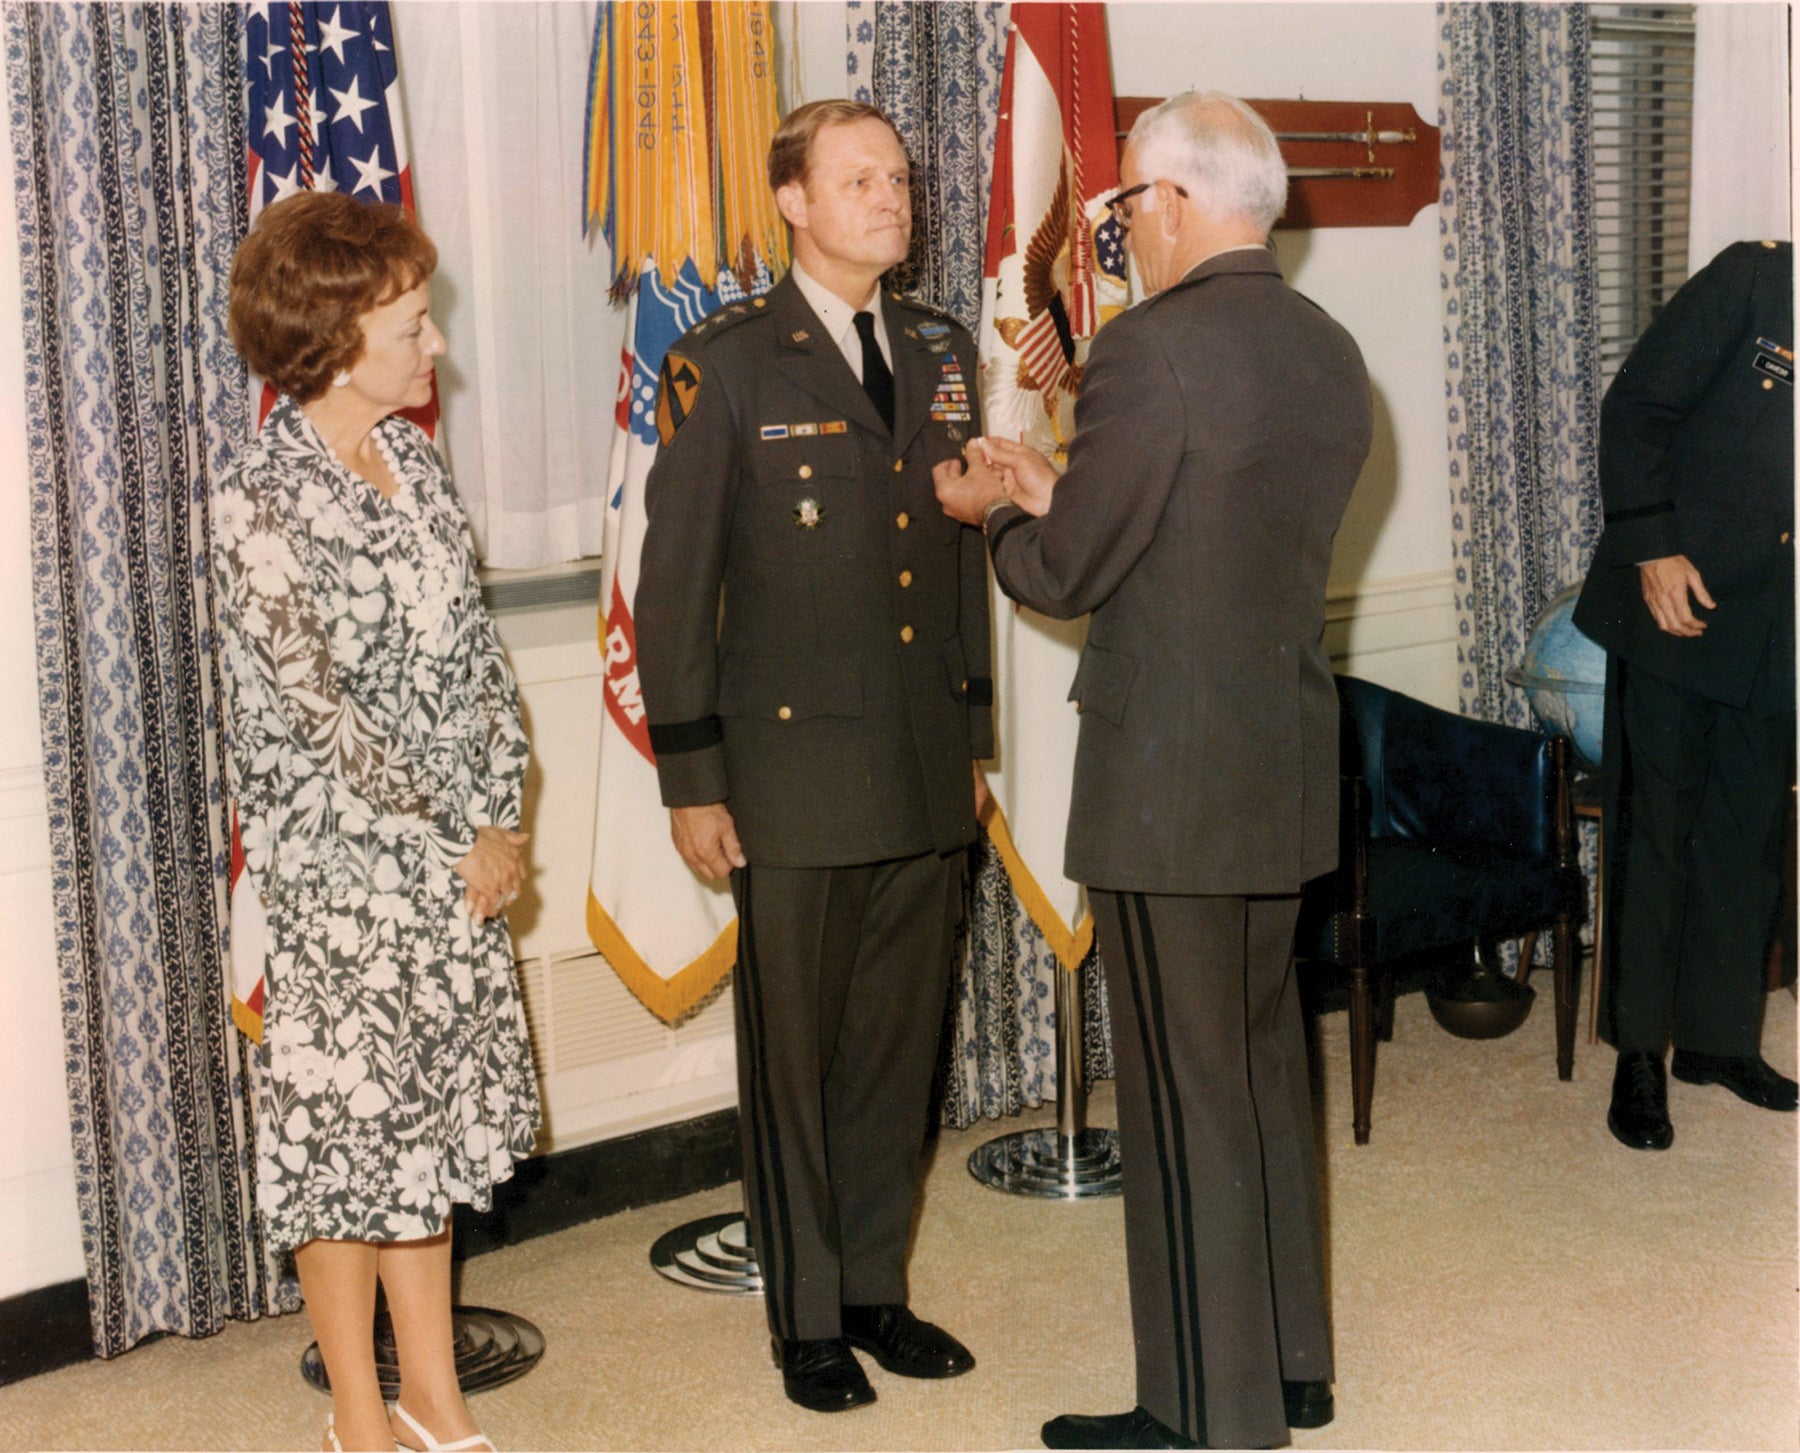 Lt. Gen. Hal Moore, center, retires from active duty in 1977 with his wife, Julie, by his side. (Credit: U.S. Army)